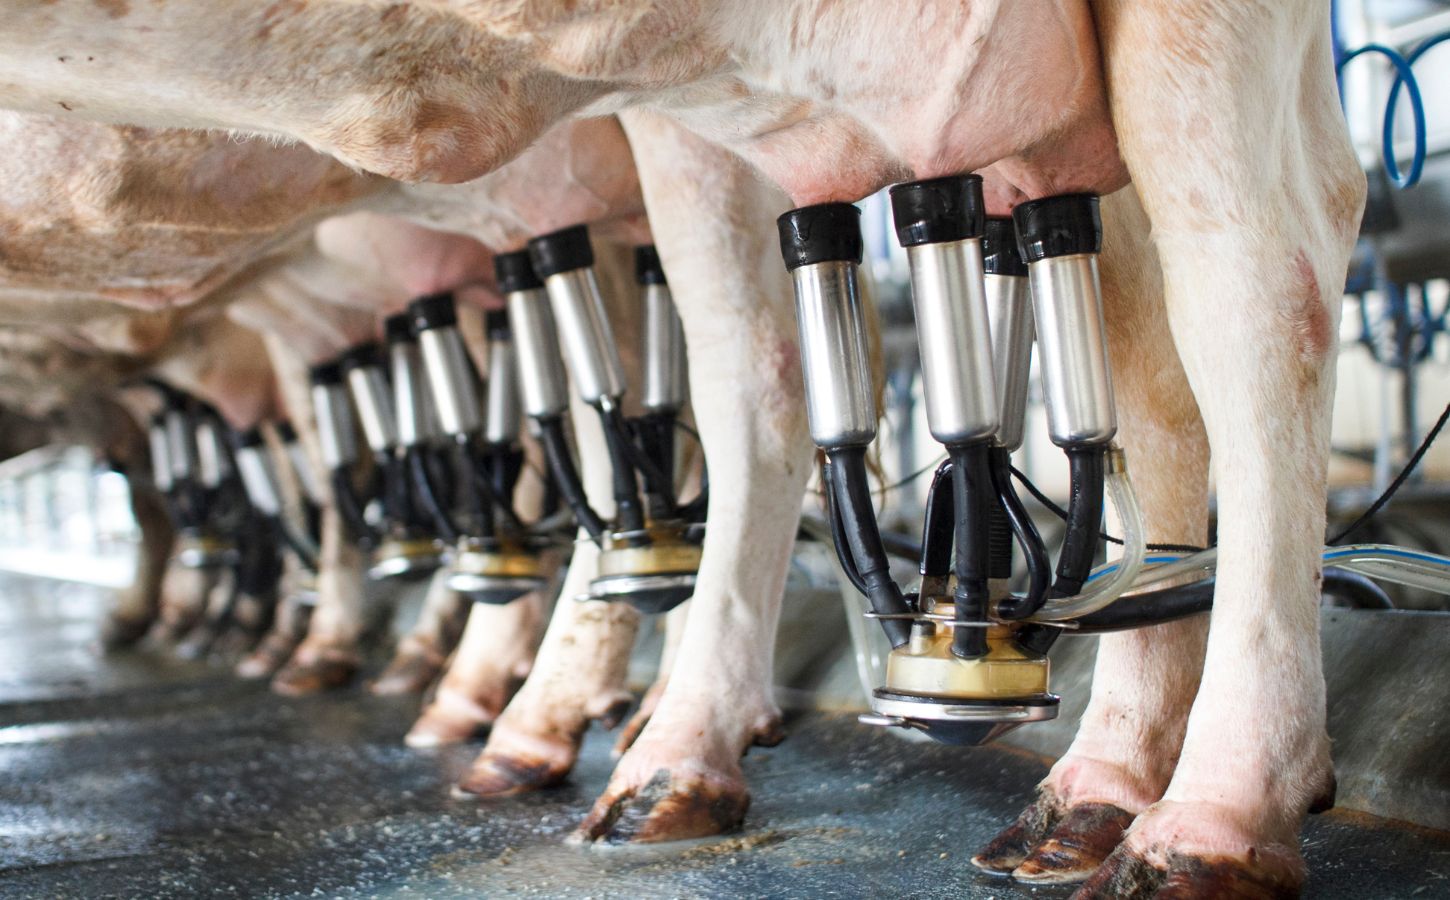 Dairy cows hooked up to milking machines